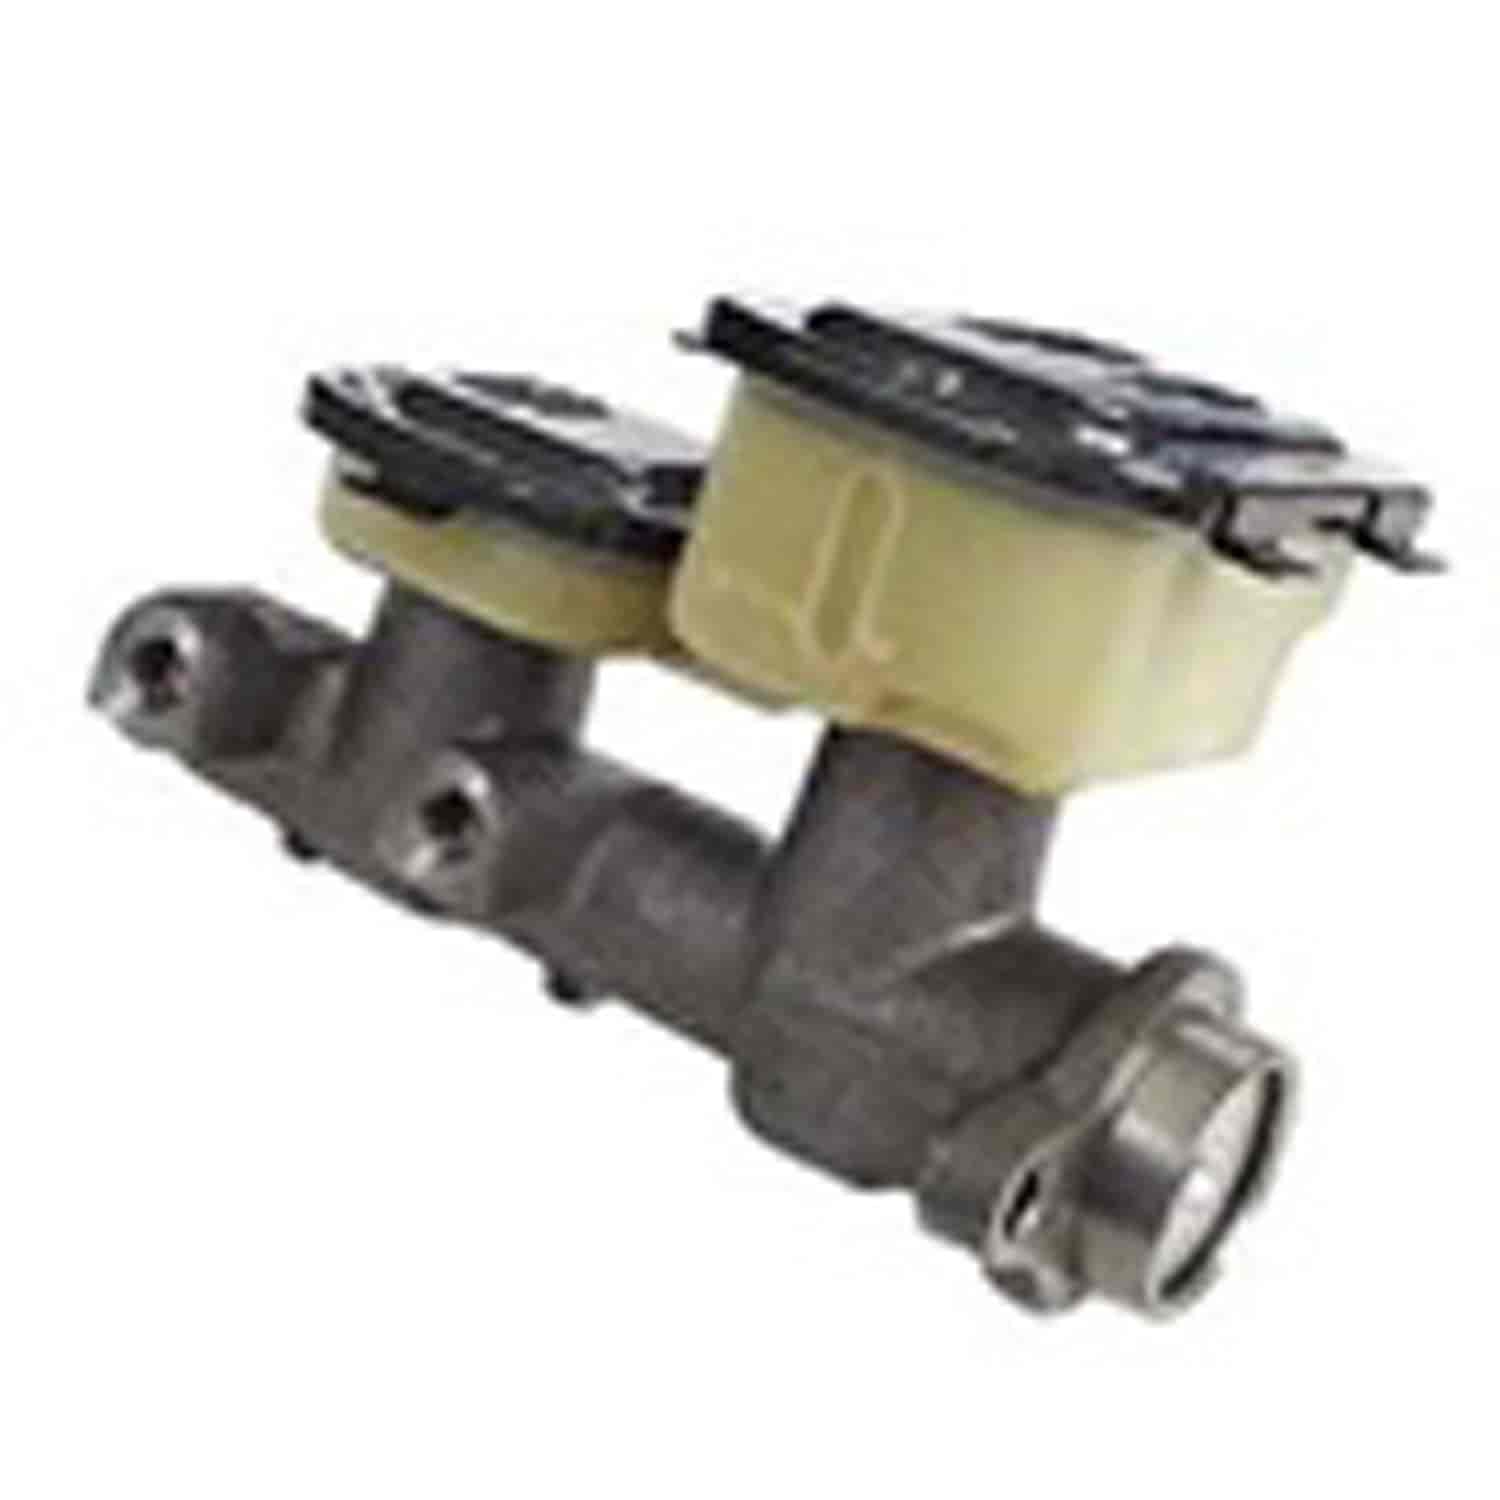 Replacement brake master cylinder from Omix-ADA, Fits 81-90 Jeep SJ Grand Wagoneers.